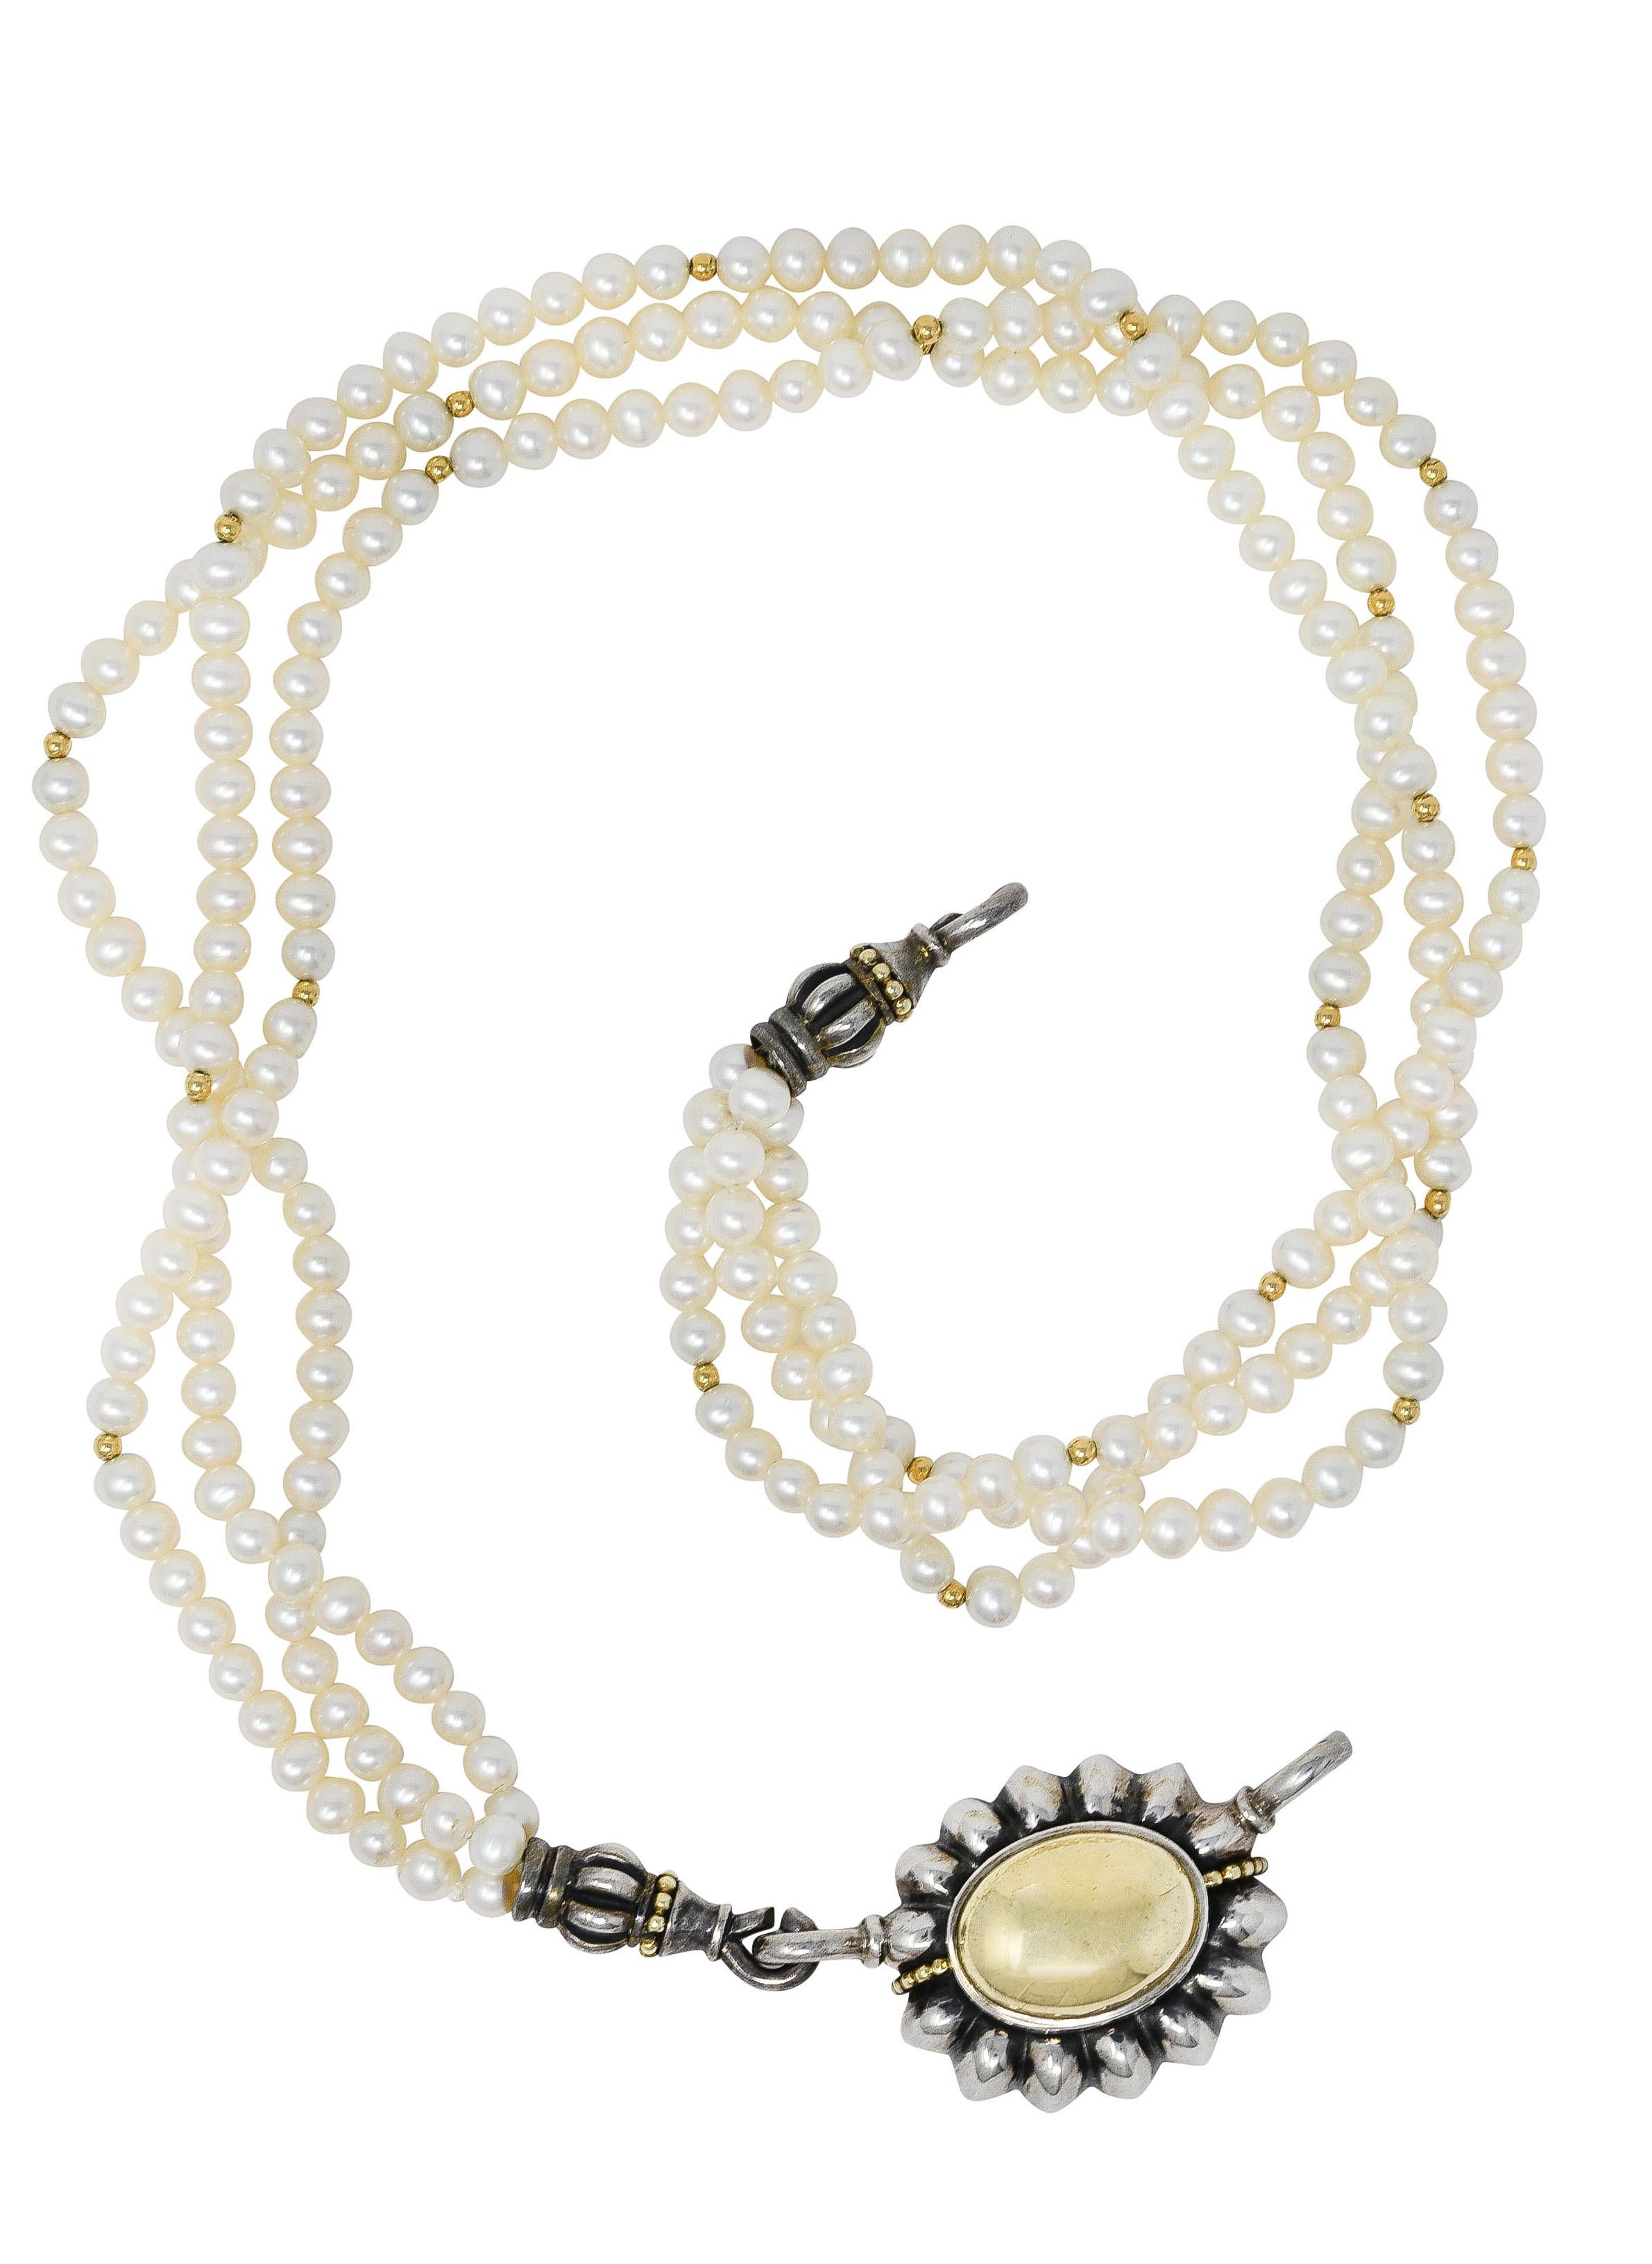 Convertible necklace designed as three strands of 3.0 mm pearls with enhancer pendant

Well matched white in body color with moderate to strong rosè overtones and very good luster

Accented by gold spacer beads and ornate ridged terminals